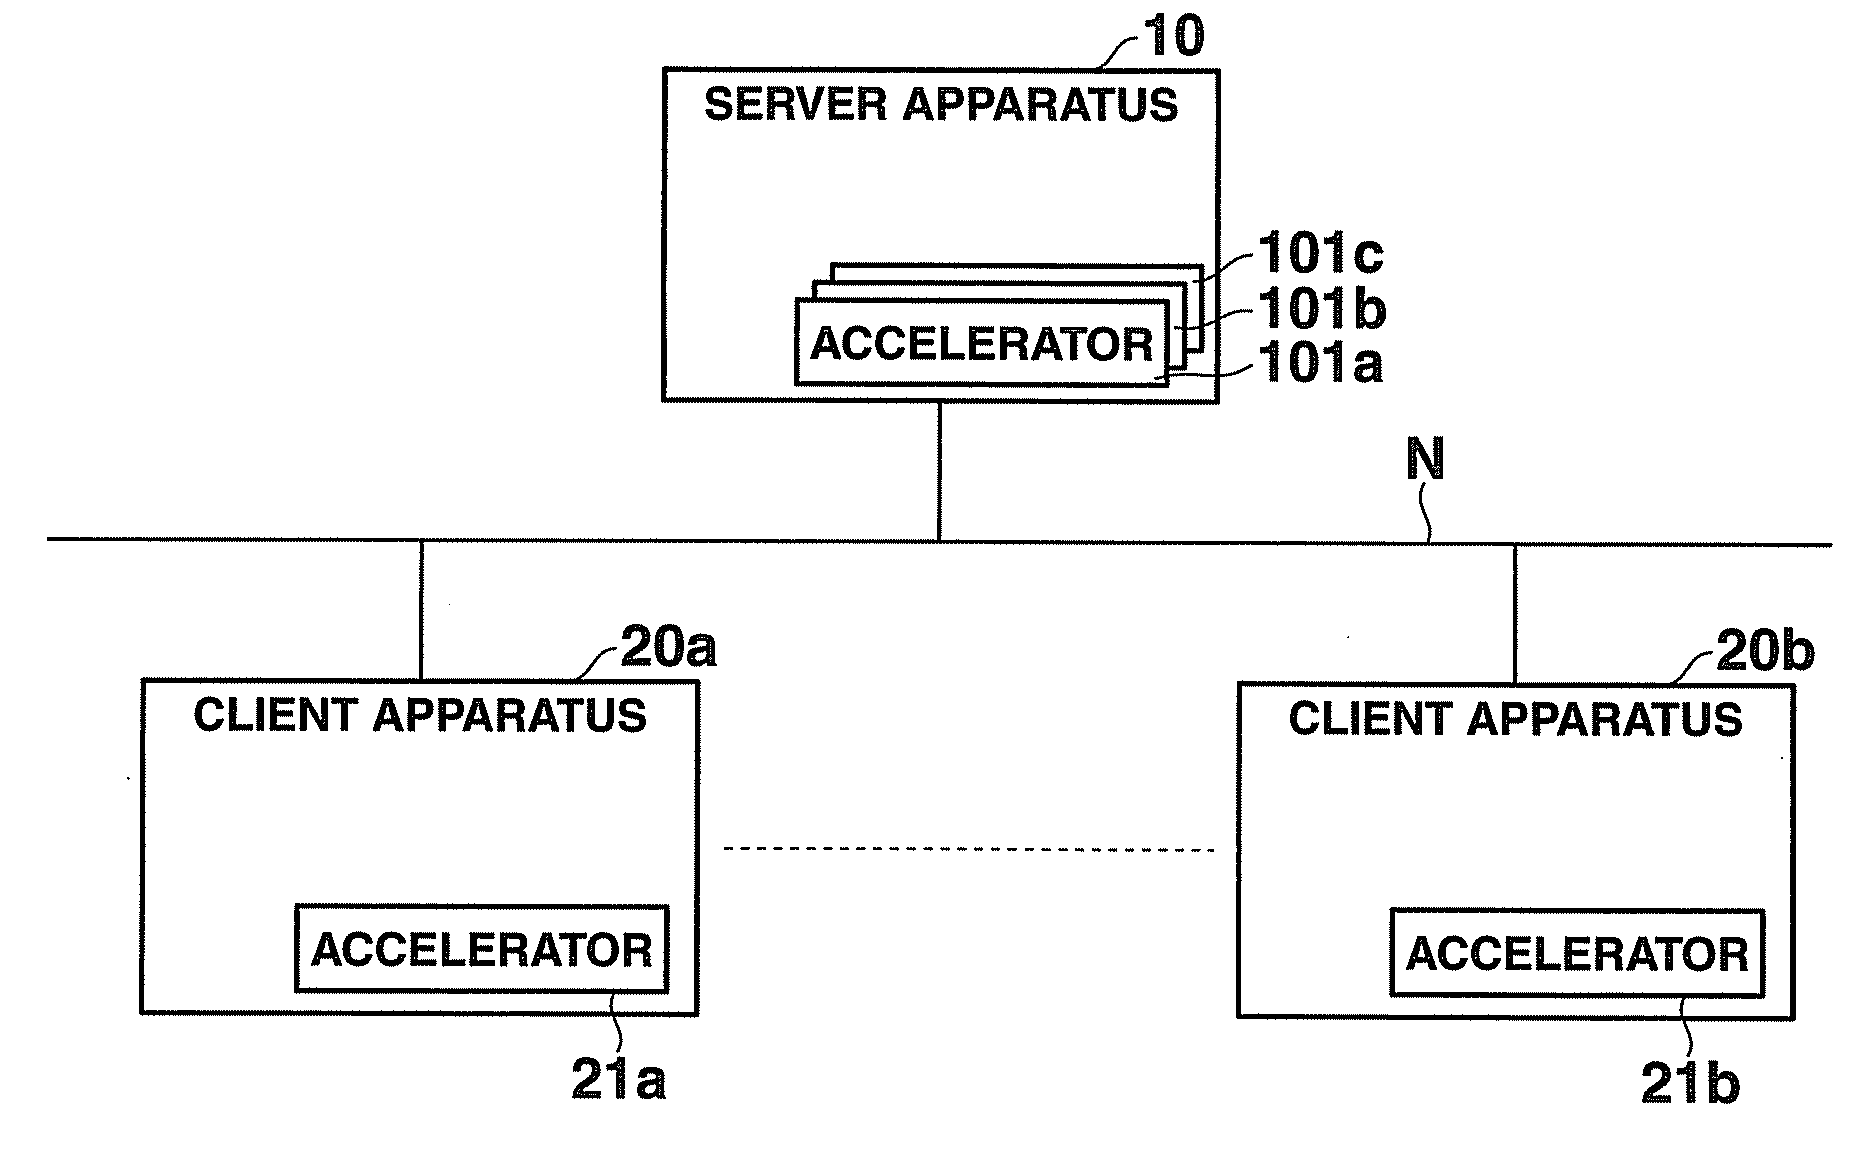 Server apparatus of computer system